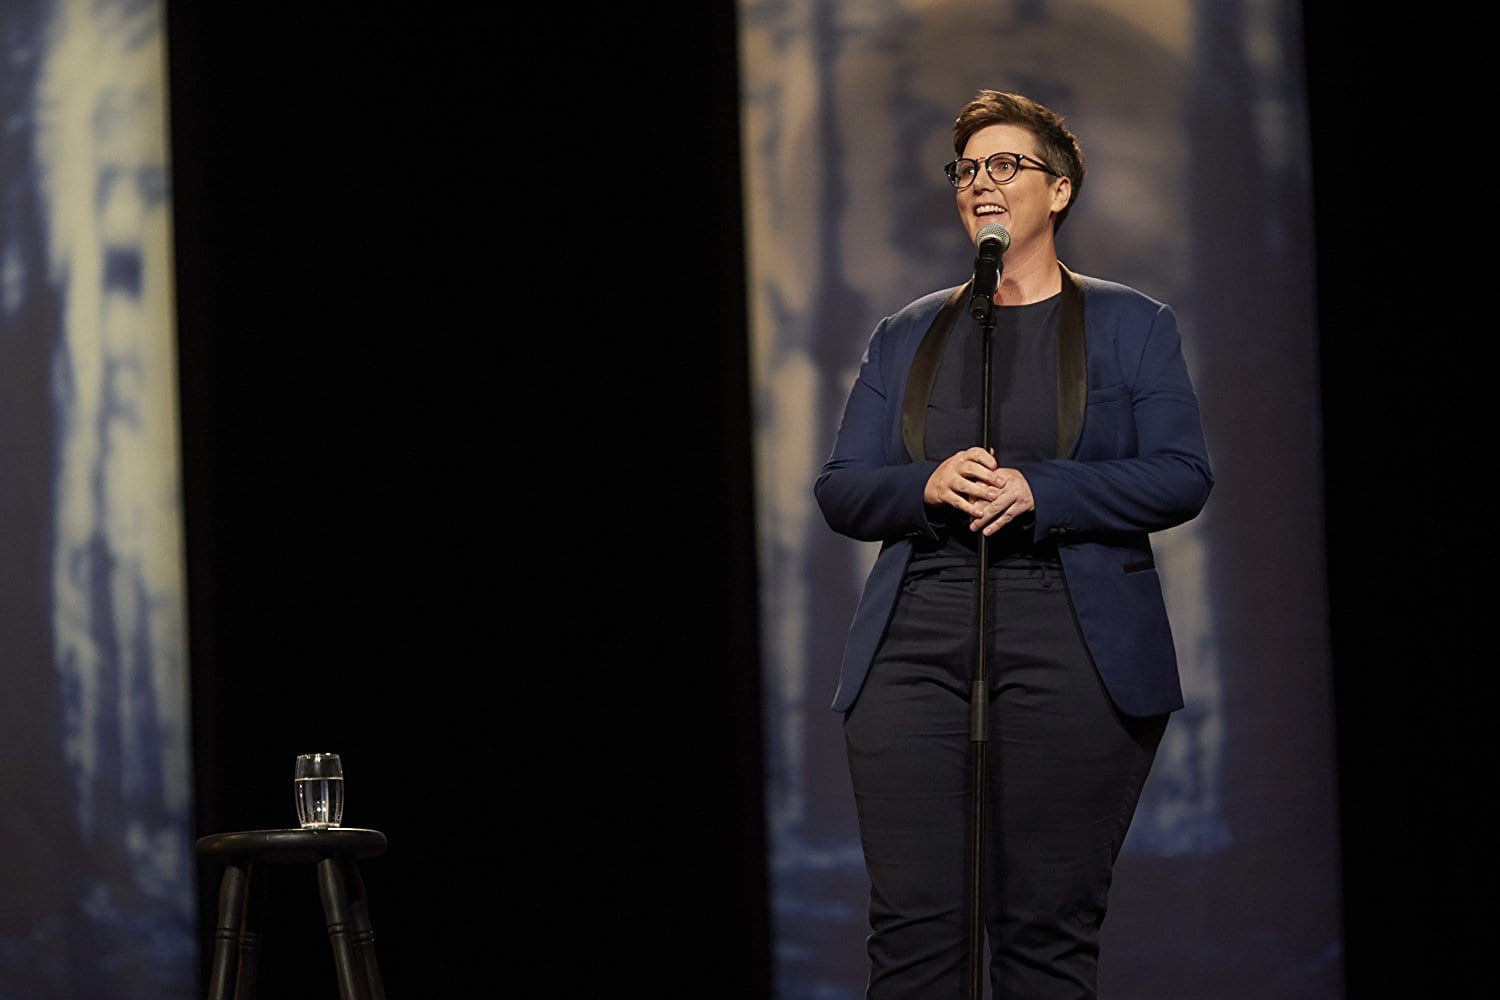 “Comedy” is appropriate to discuss Australian Hannah Gadsby’s live set 'Nanette' – more in reference to reviewers’ reactions than anything else.